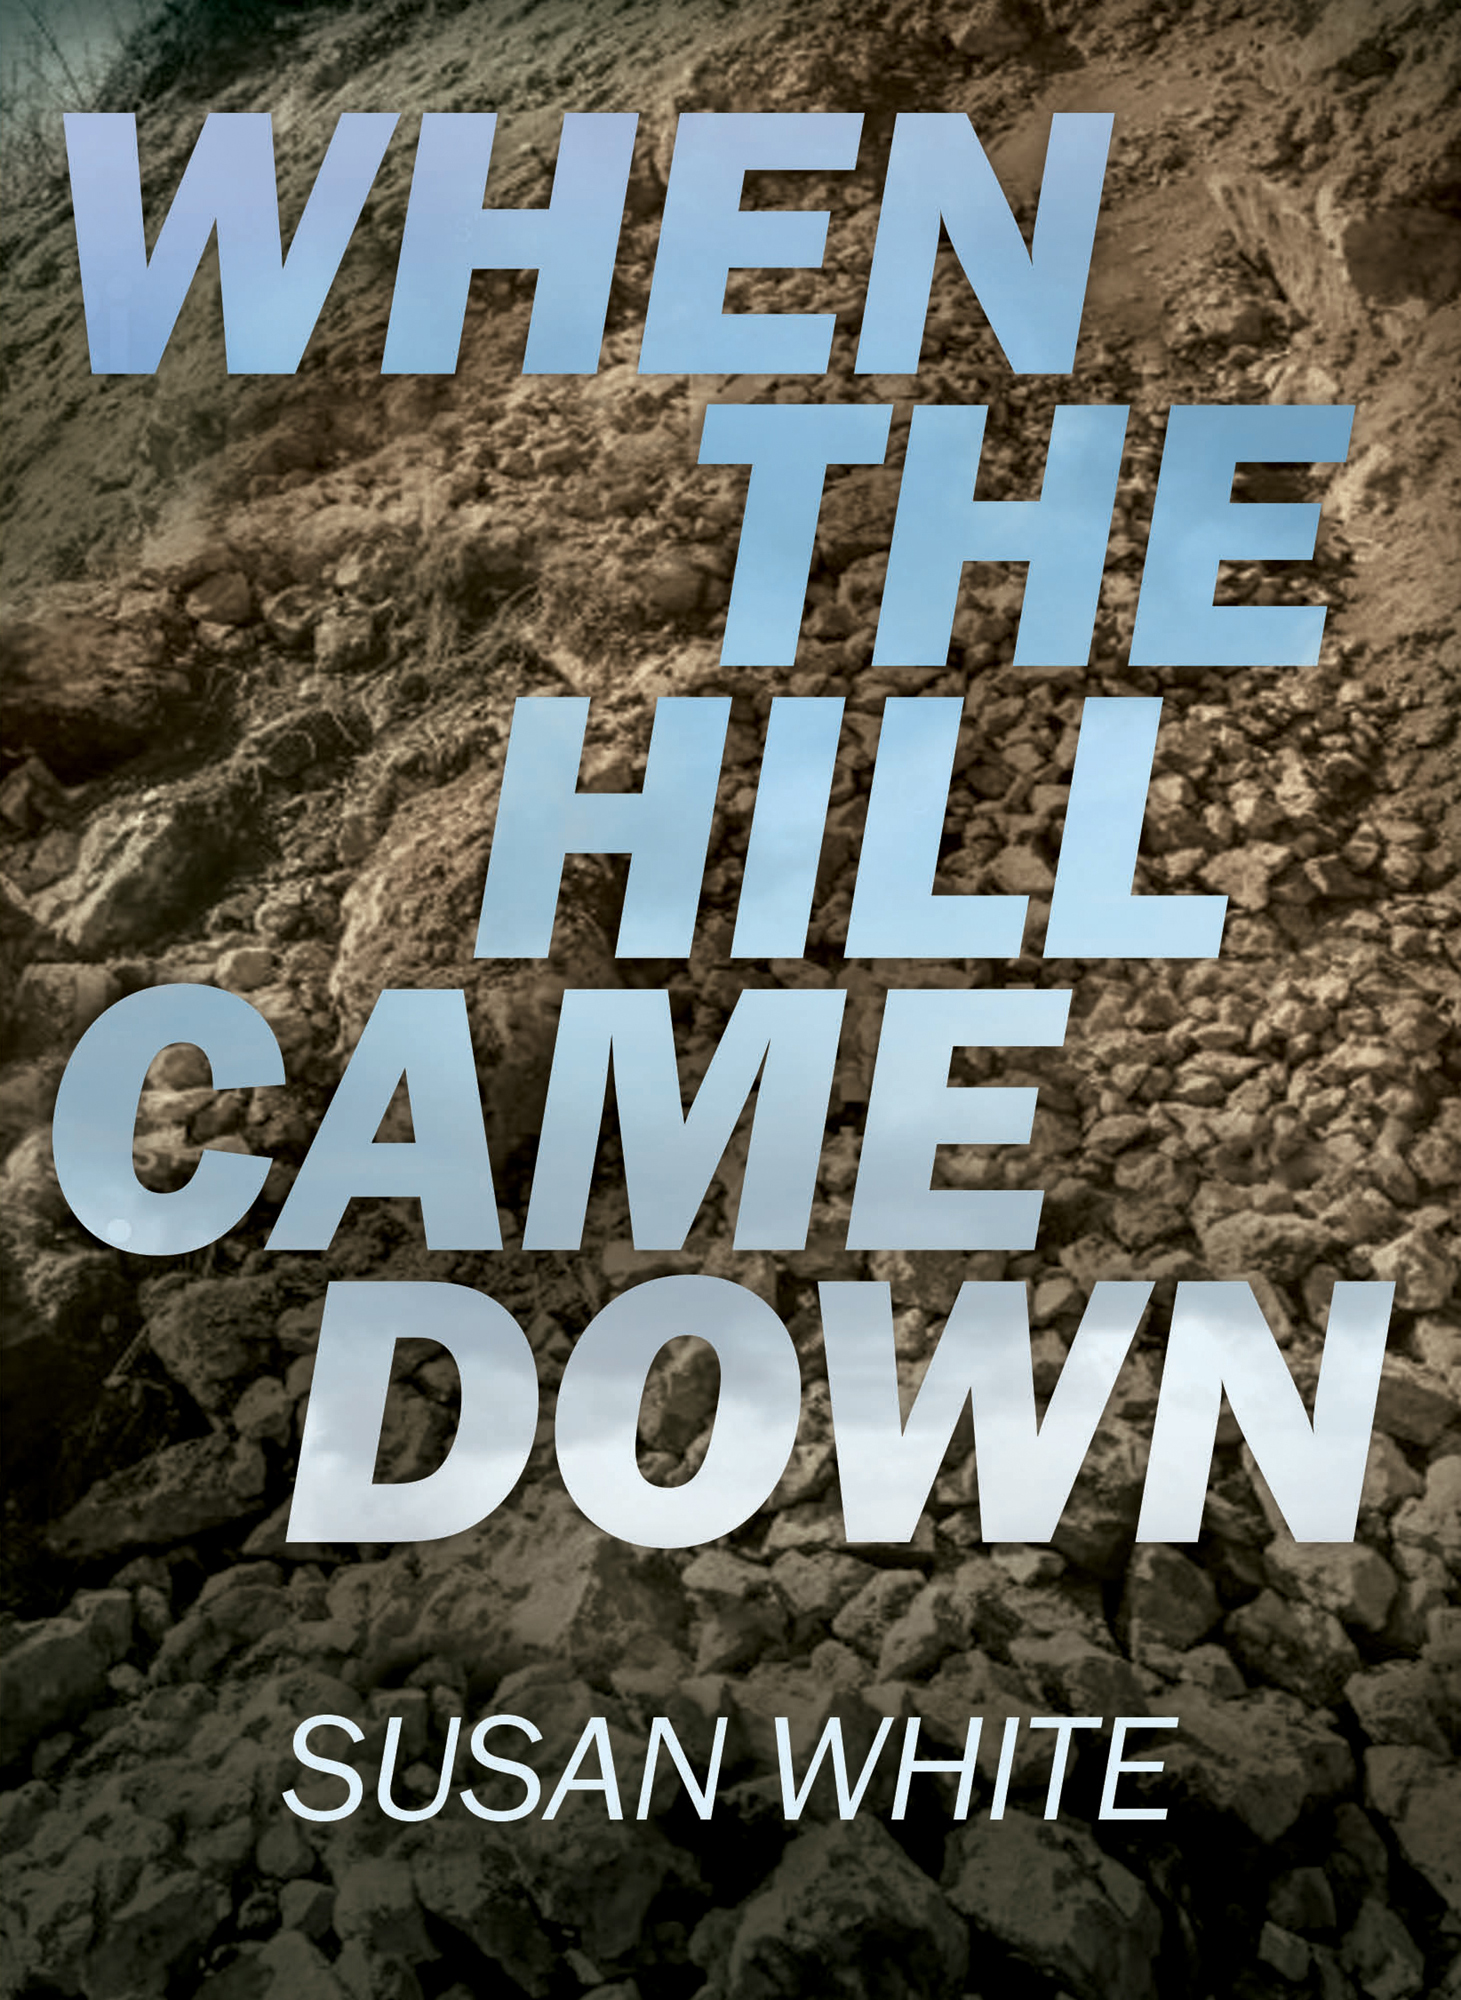 When the Hill Came Down